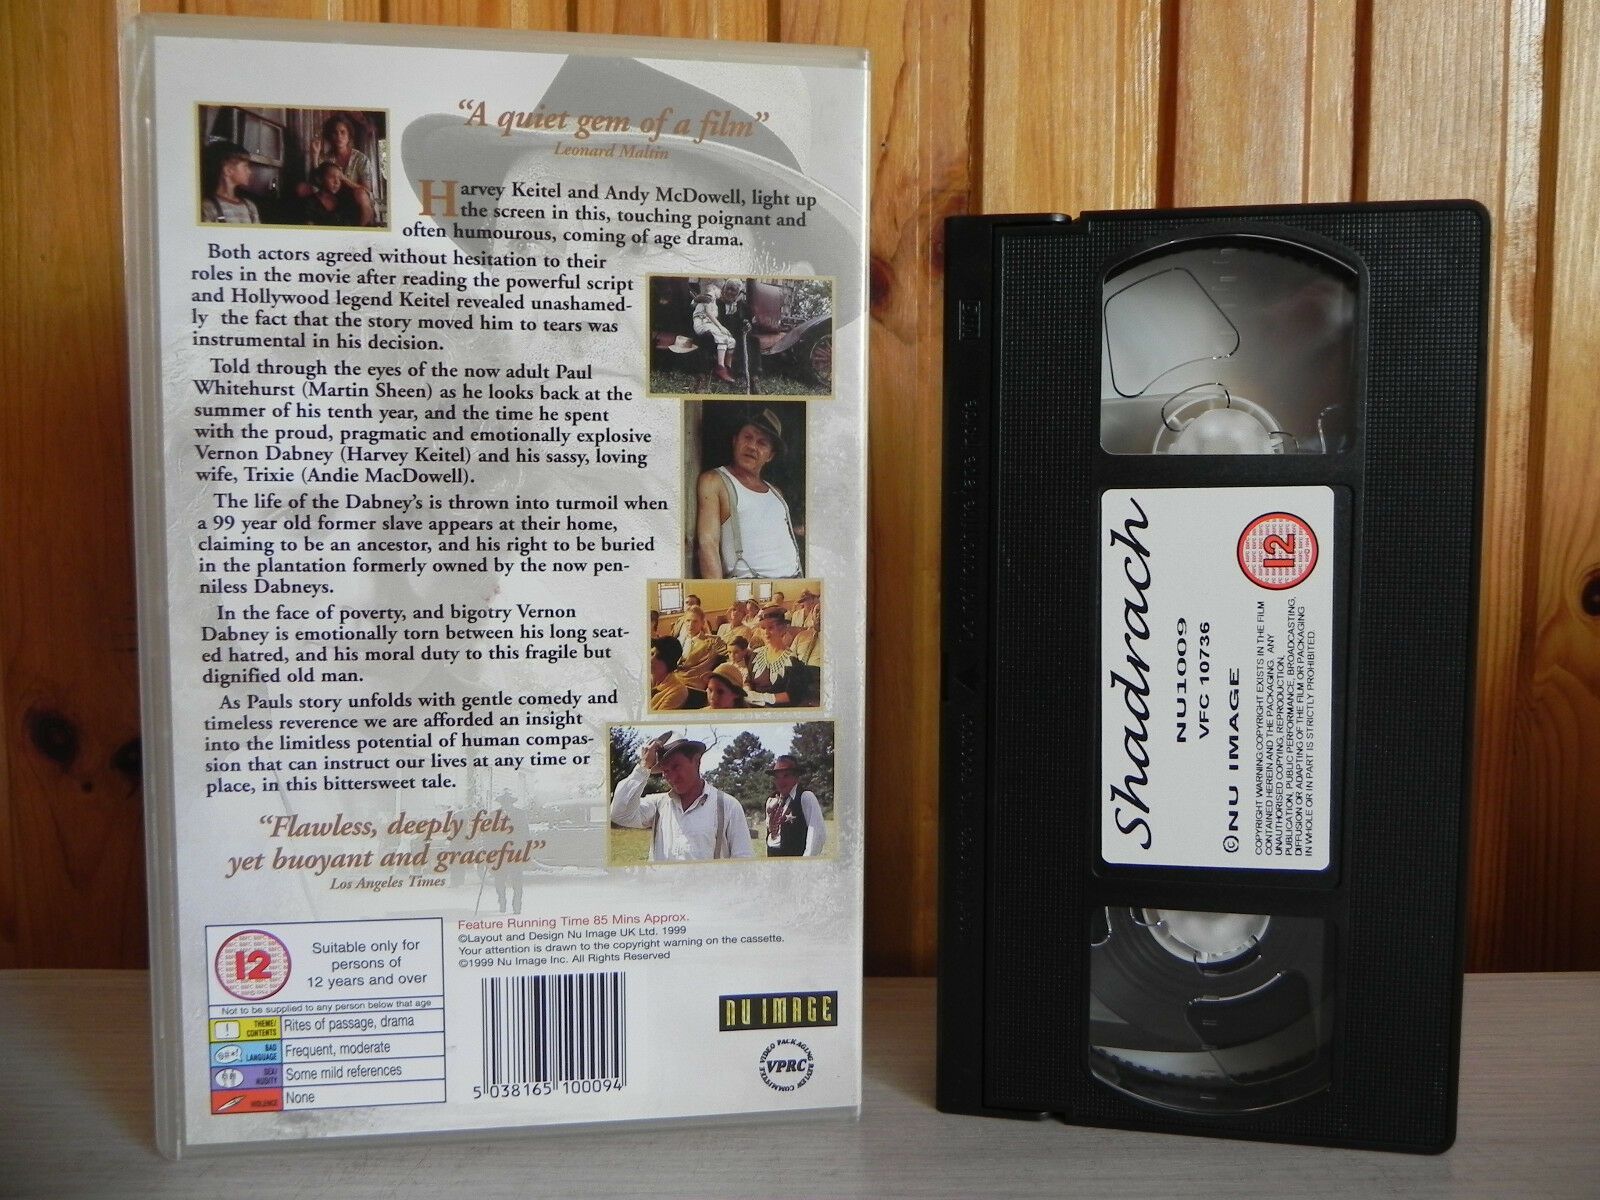 Shadrach, Nu Image, Coming Of Age Drama, A Quiet Gem Of A Film, Pal VHS ...